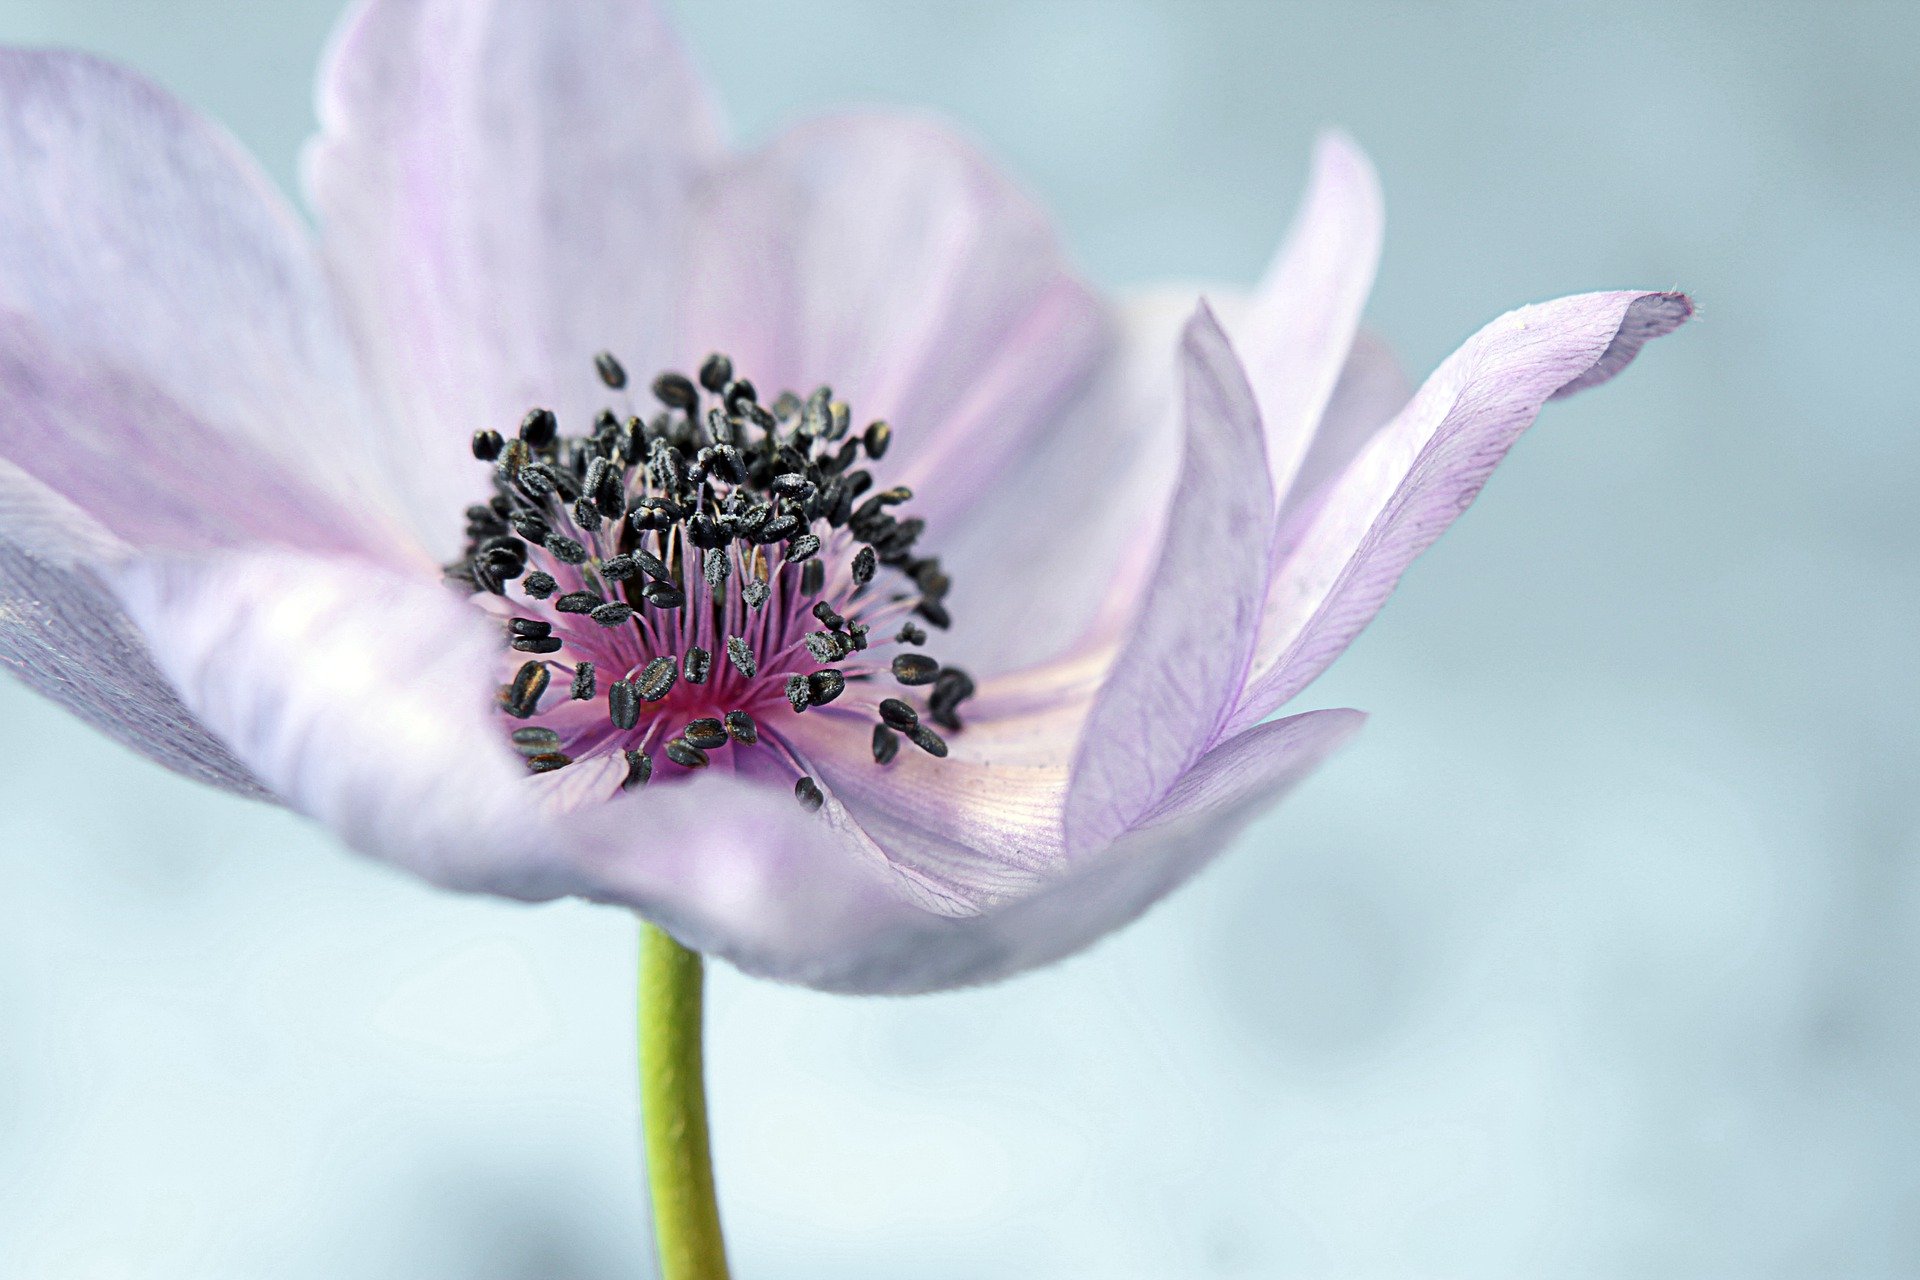 347 autumn blooming anemone 7107422 1920